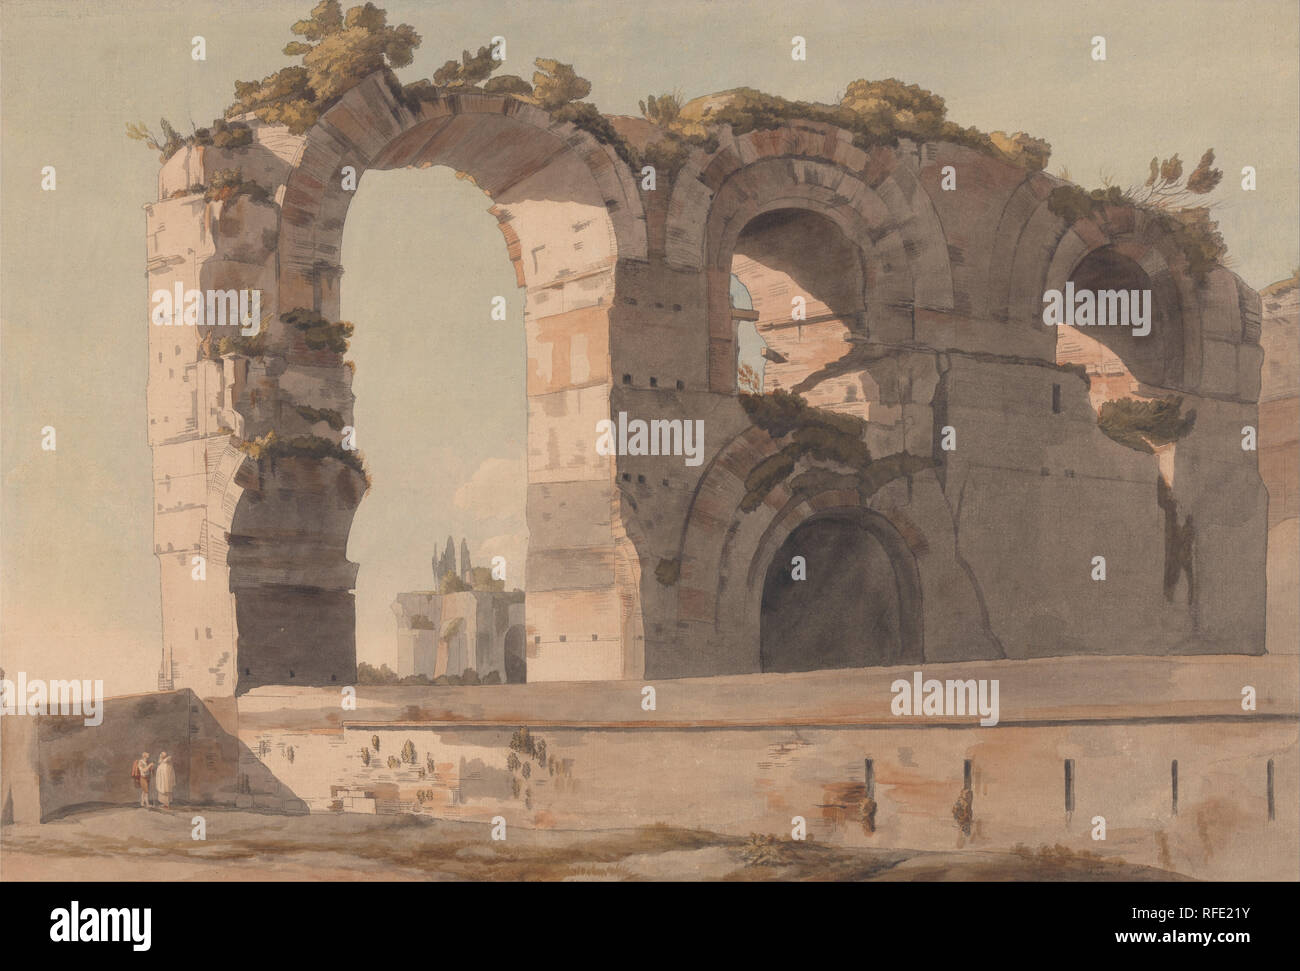 The Claudian Aquaduct, Rome. Date/Period: 1785. Architectural subject. Watercolor with pen and black ink, over graphite on medium, slightly textured, cream laid paper. Height: 432 mm (17 in); Width: 584 mm (22.99 in). Author: Francis Towne. Stock Photo